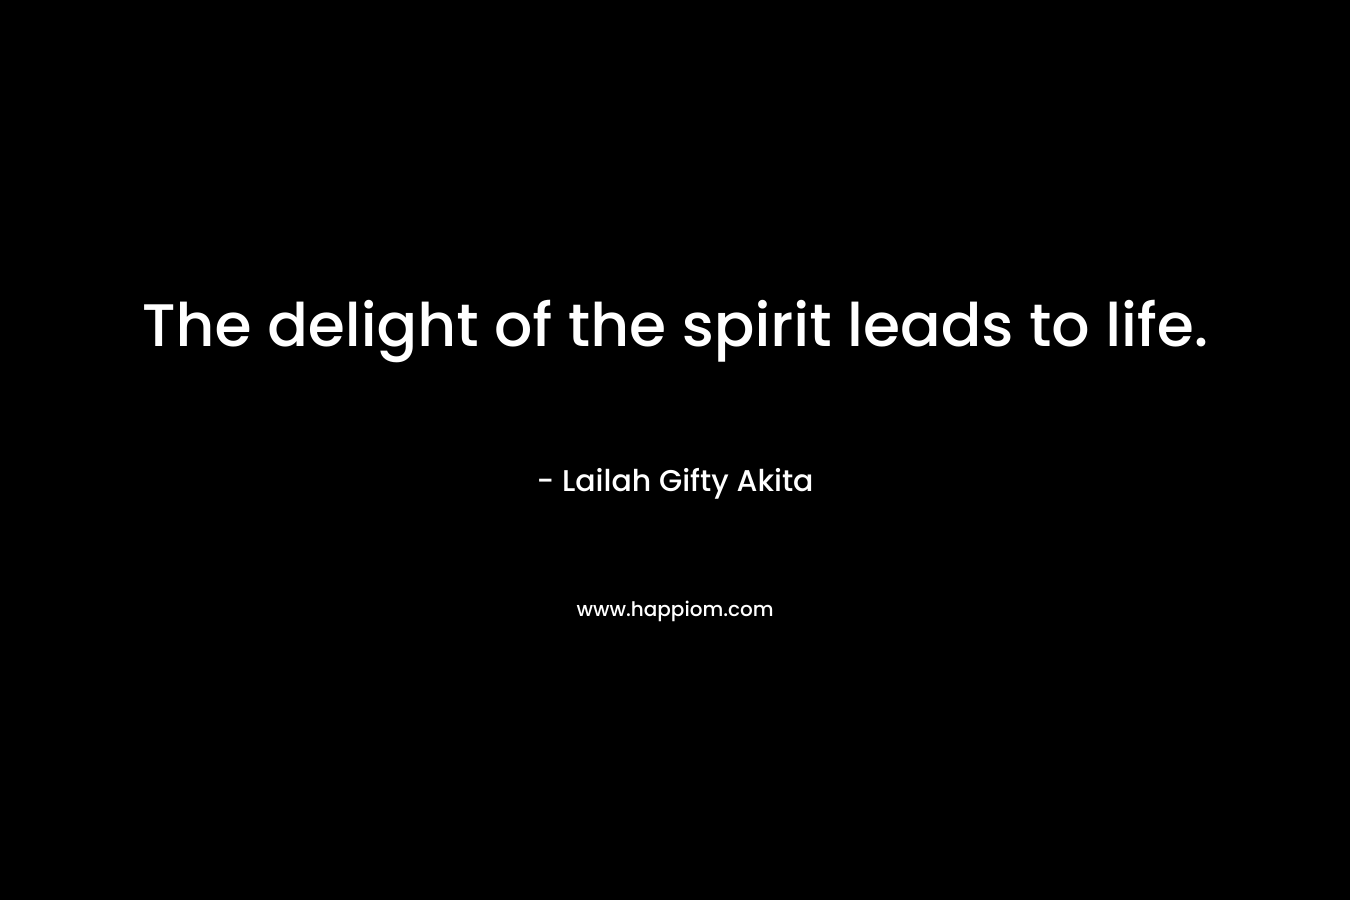 The delight of the spirit leads to life.